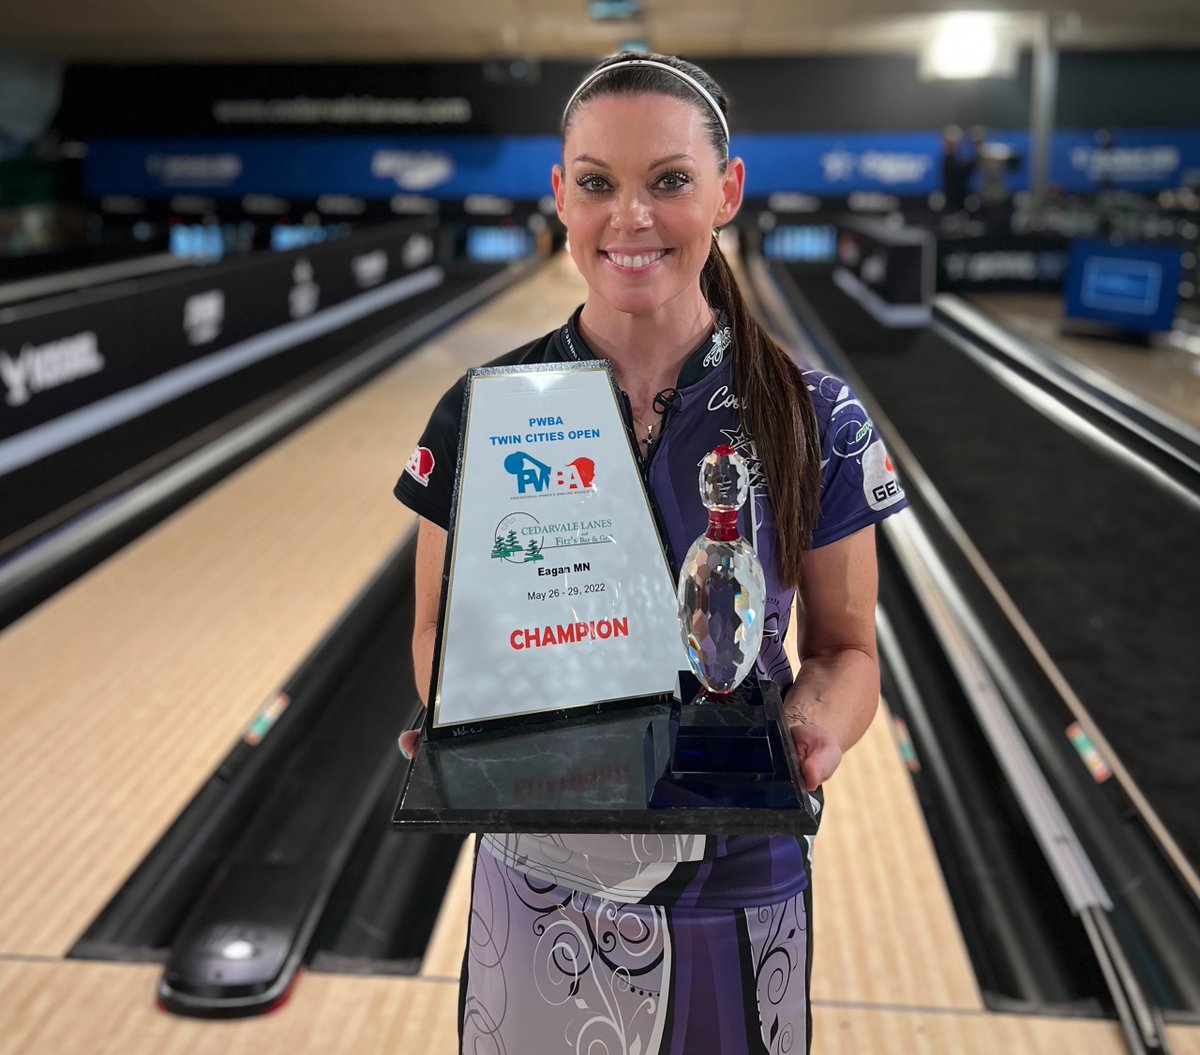 Tomorrow marks the start the 2024 PWBA National Tour season with the PWBA GoBowling! Twin Cities Open, so don't miss out on an exciting weekend of bowling on BowlTV! Read the preview here: bit.ly/3UDkbq6